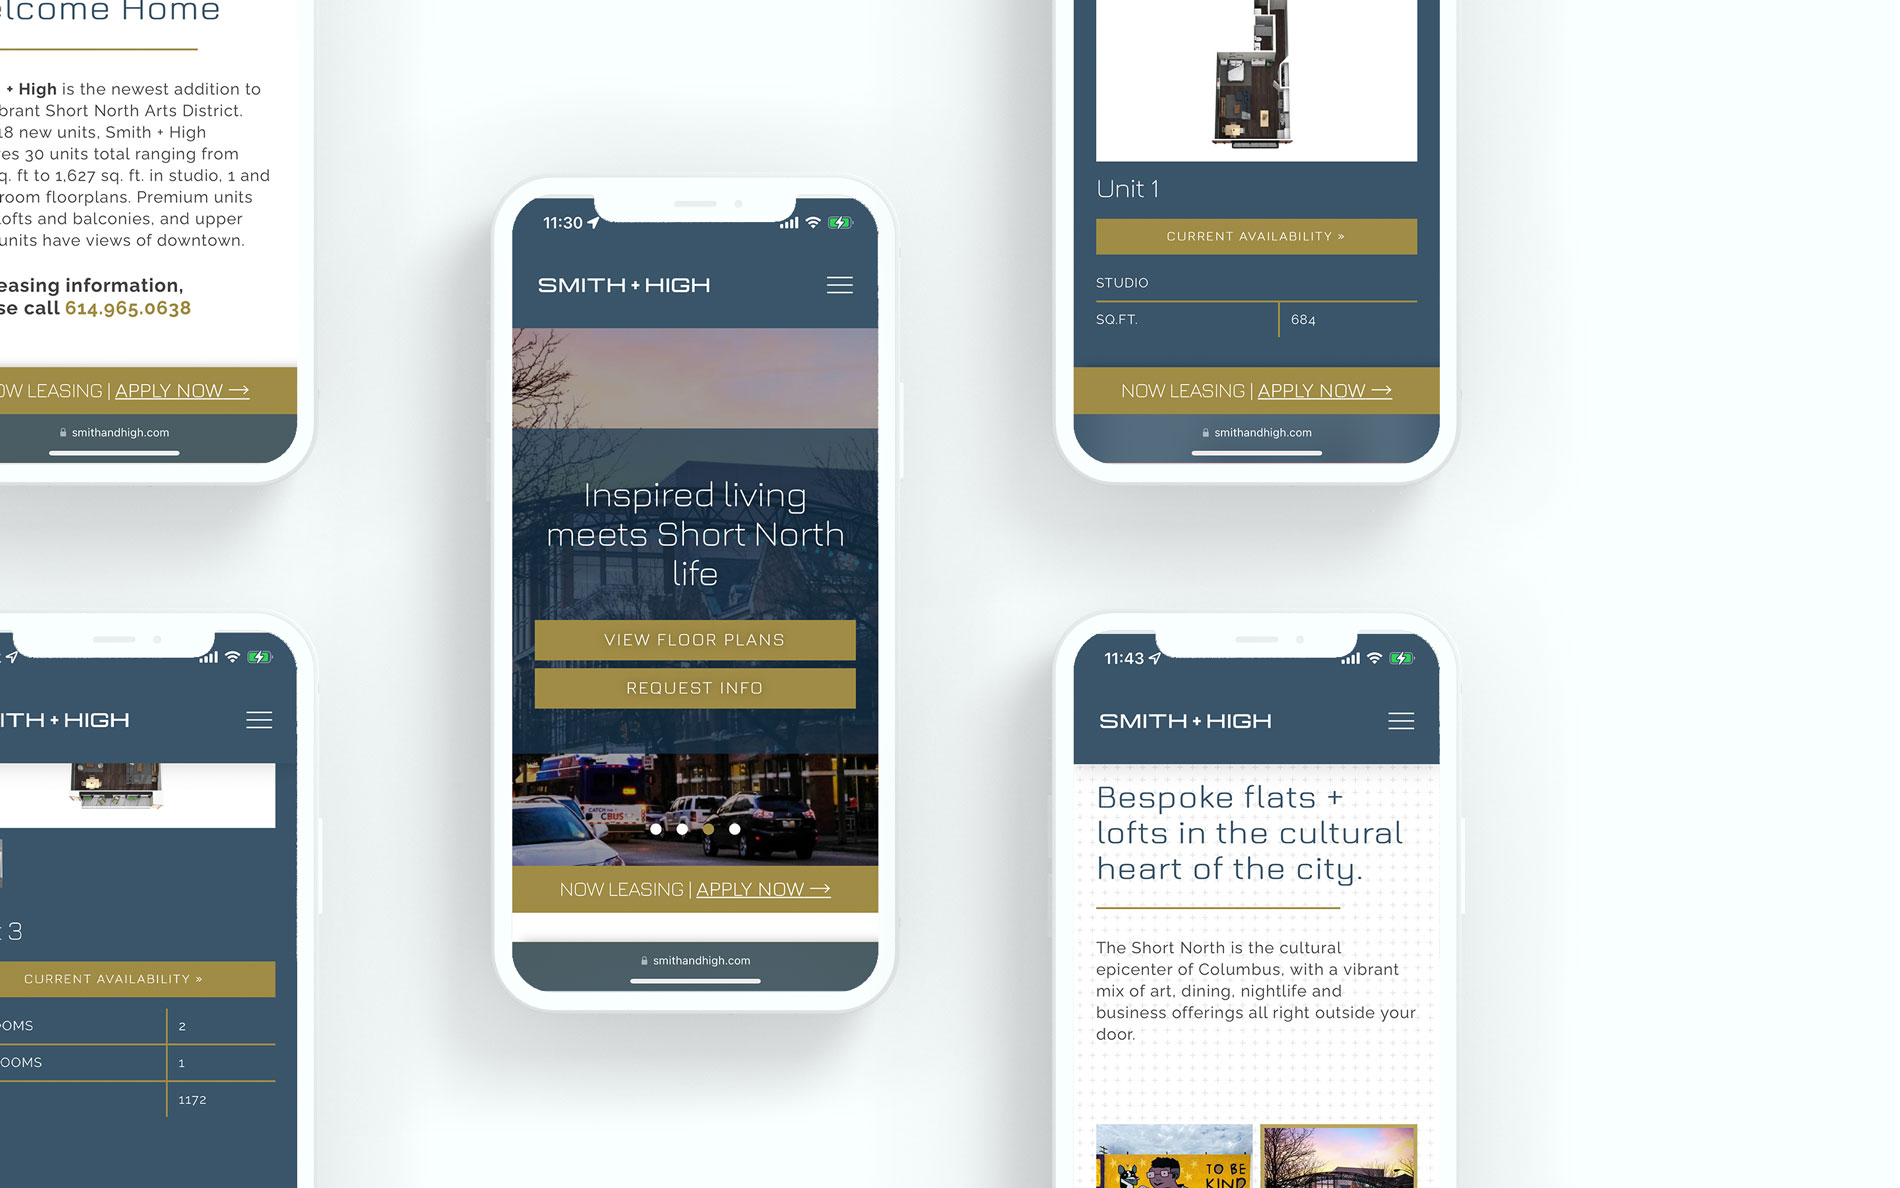 Smith + High website design for modern housing shown on mobile devices